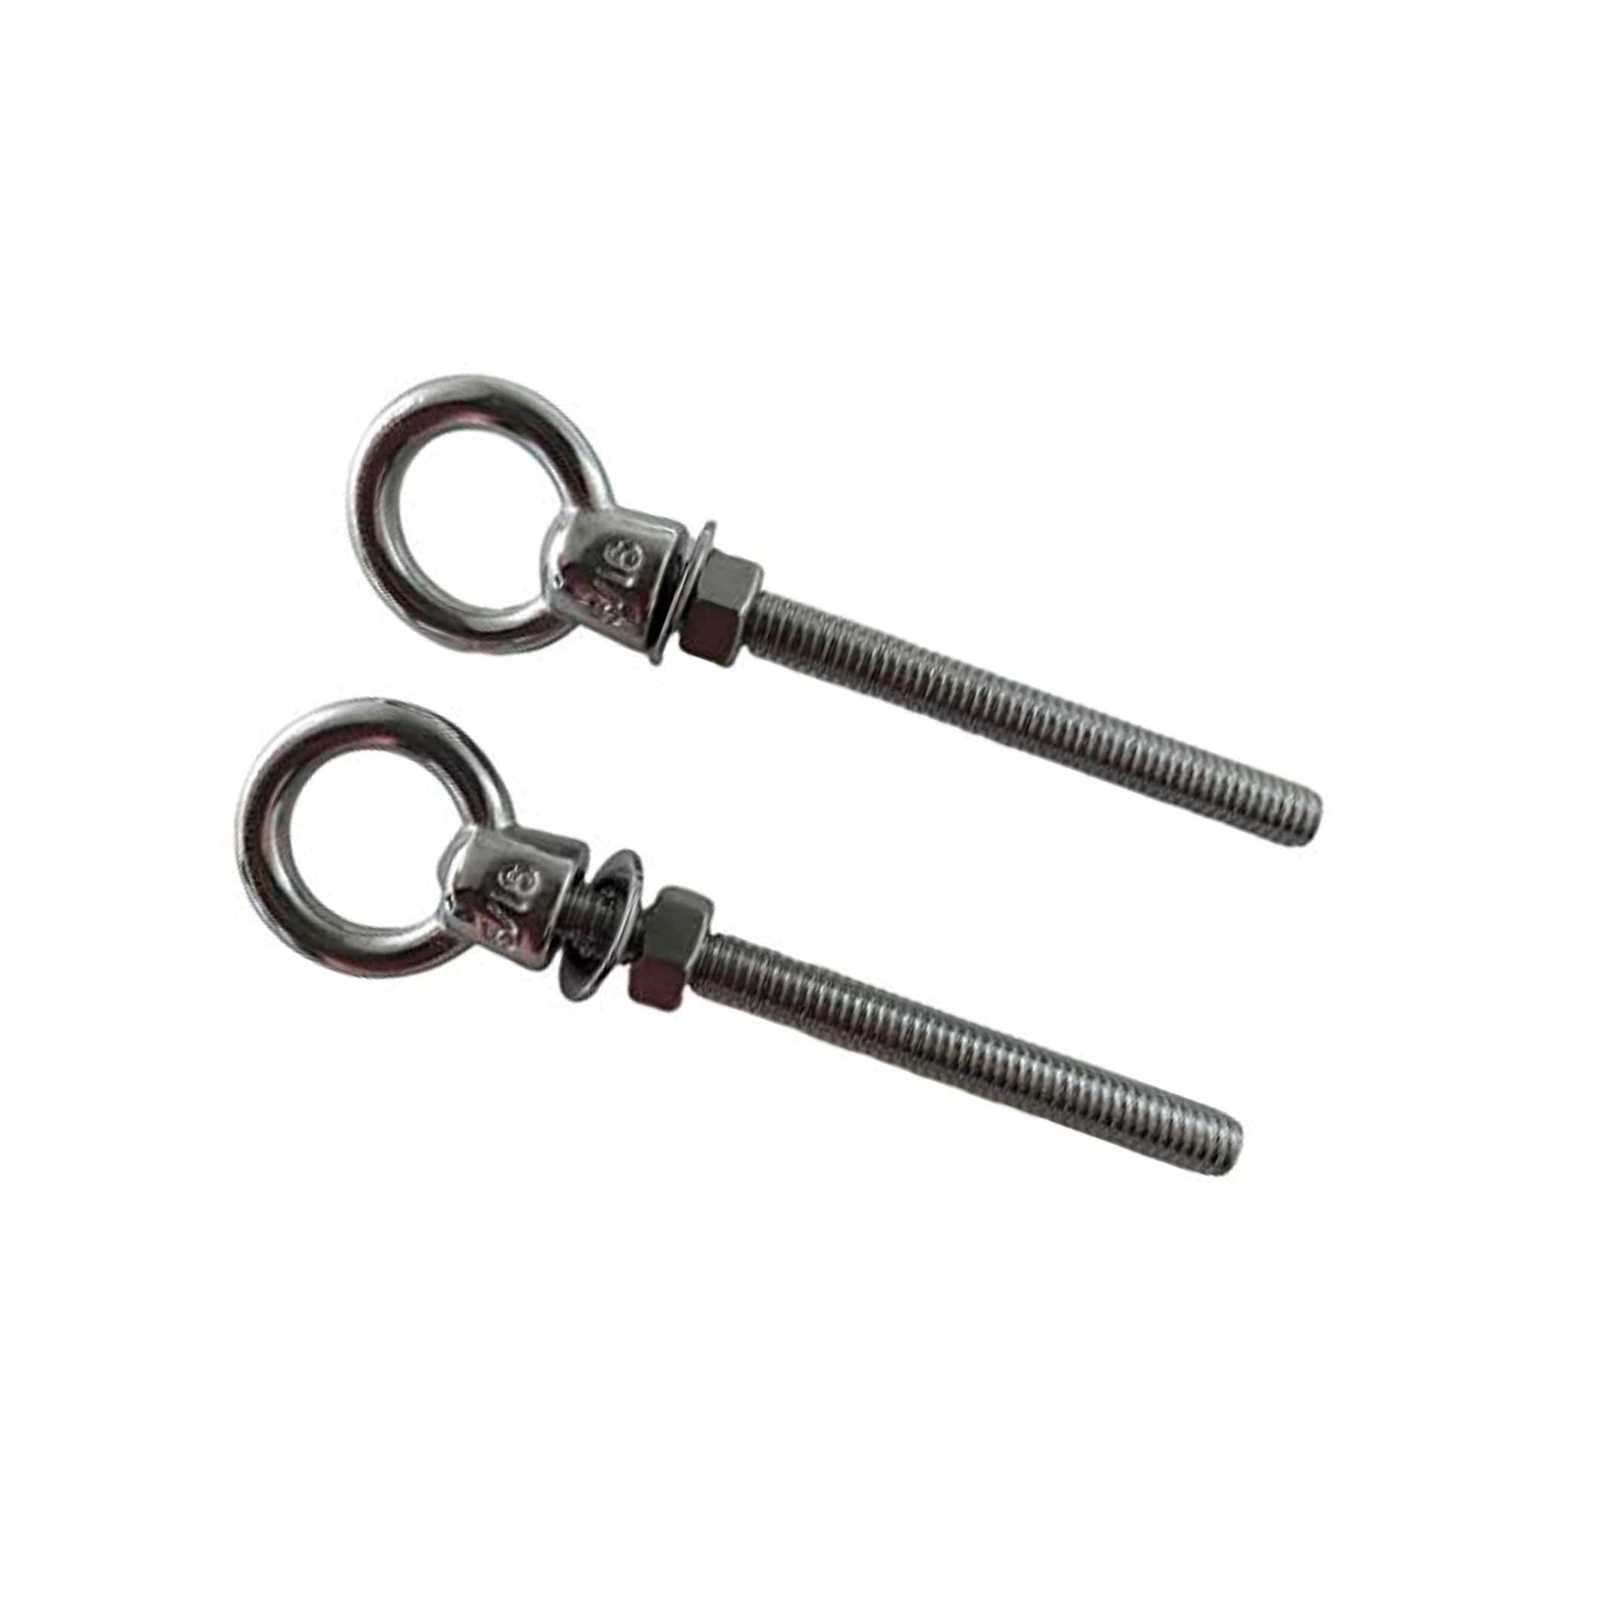 2 Pieces Stainless Steel 316 (Shape Type 307) Lifting Eye Bolt 5/16 Unc X 12